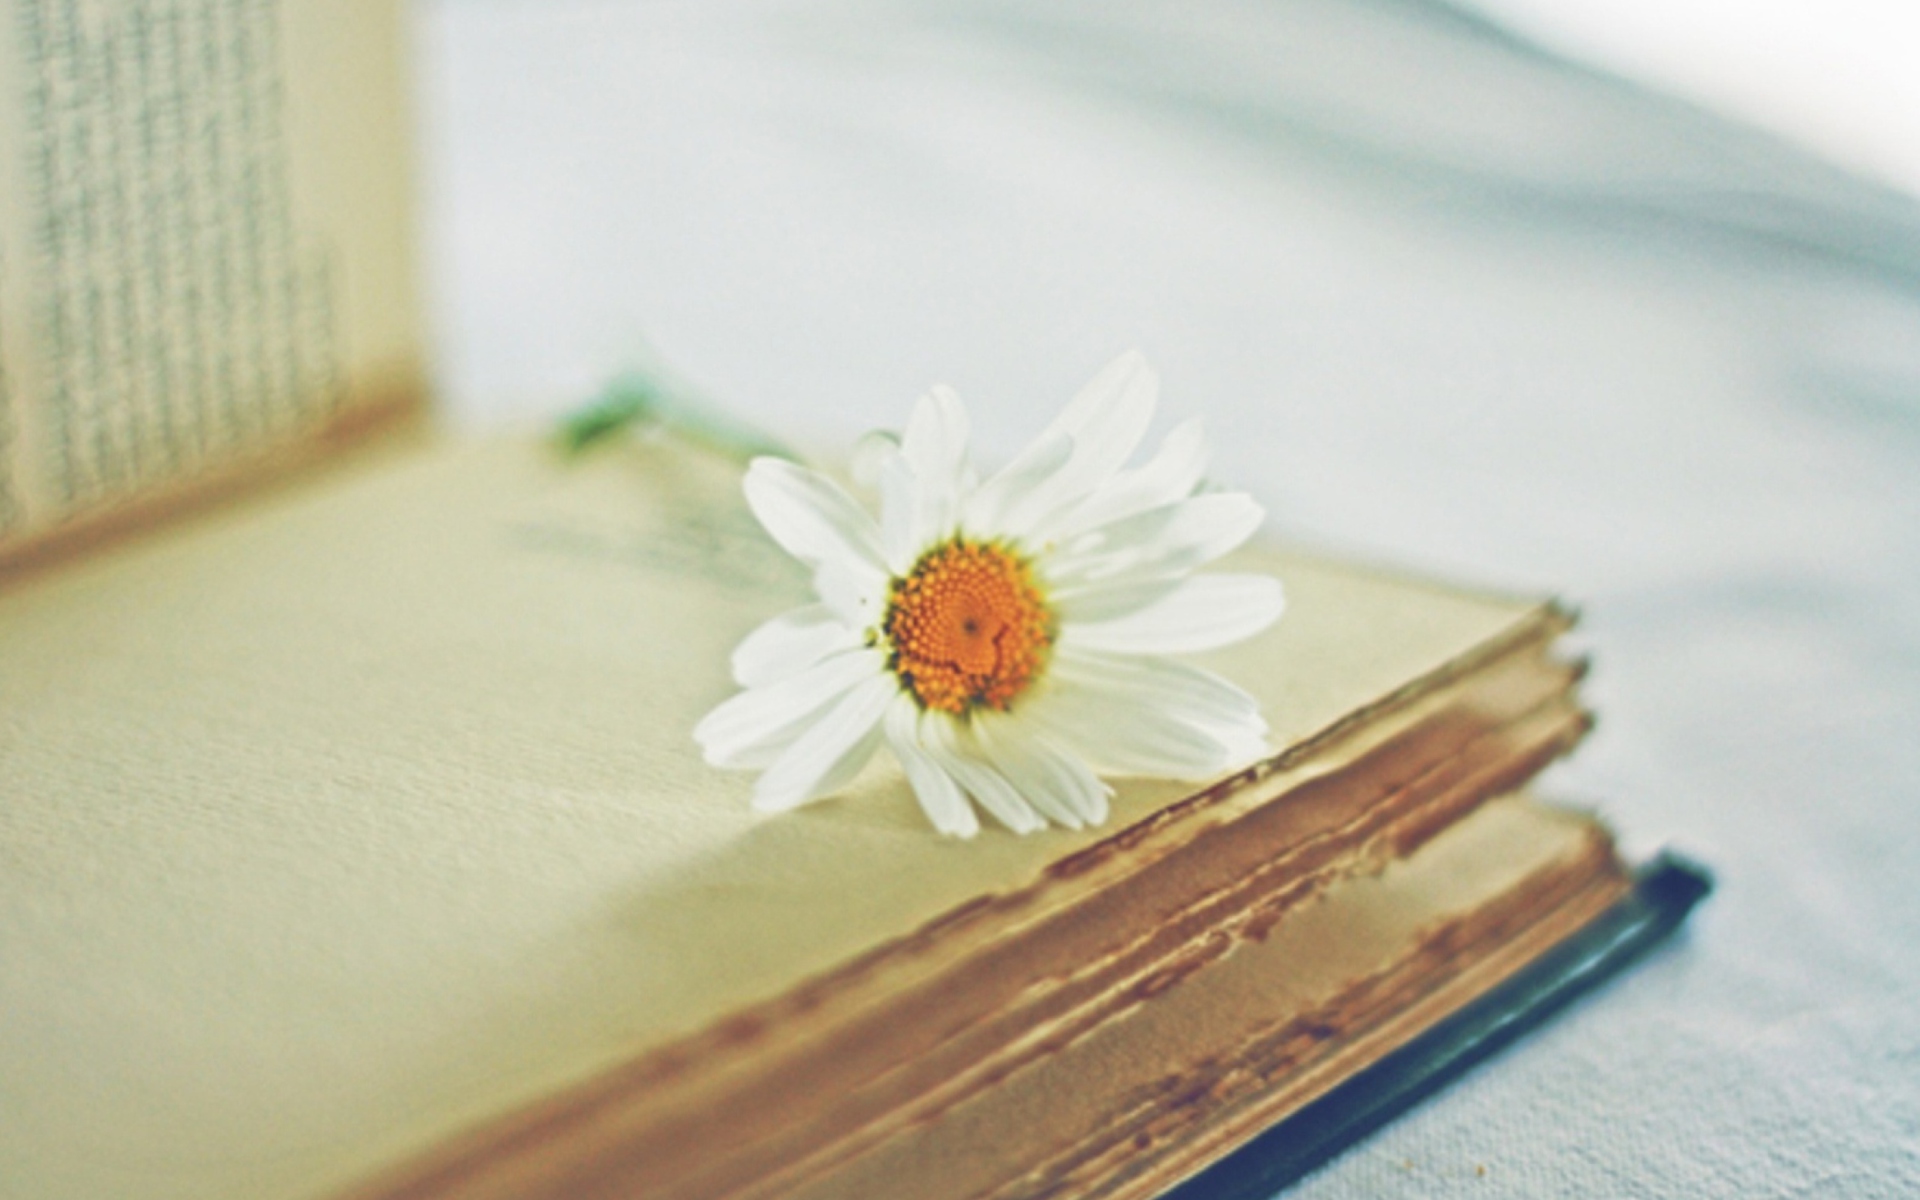 Book And Daisy wallpaper 1920x1200